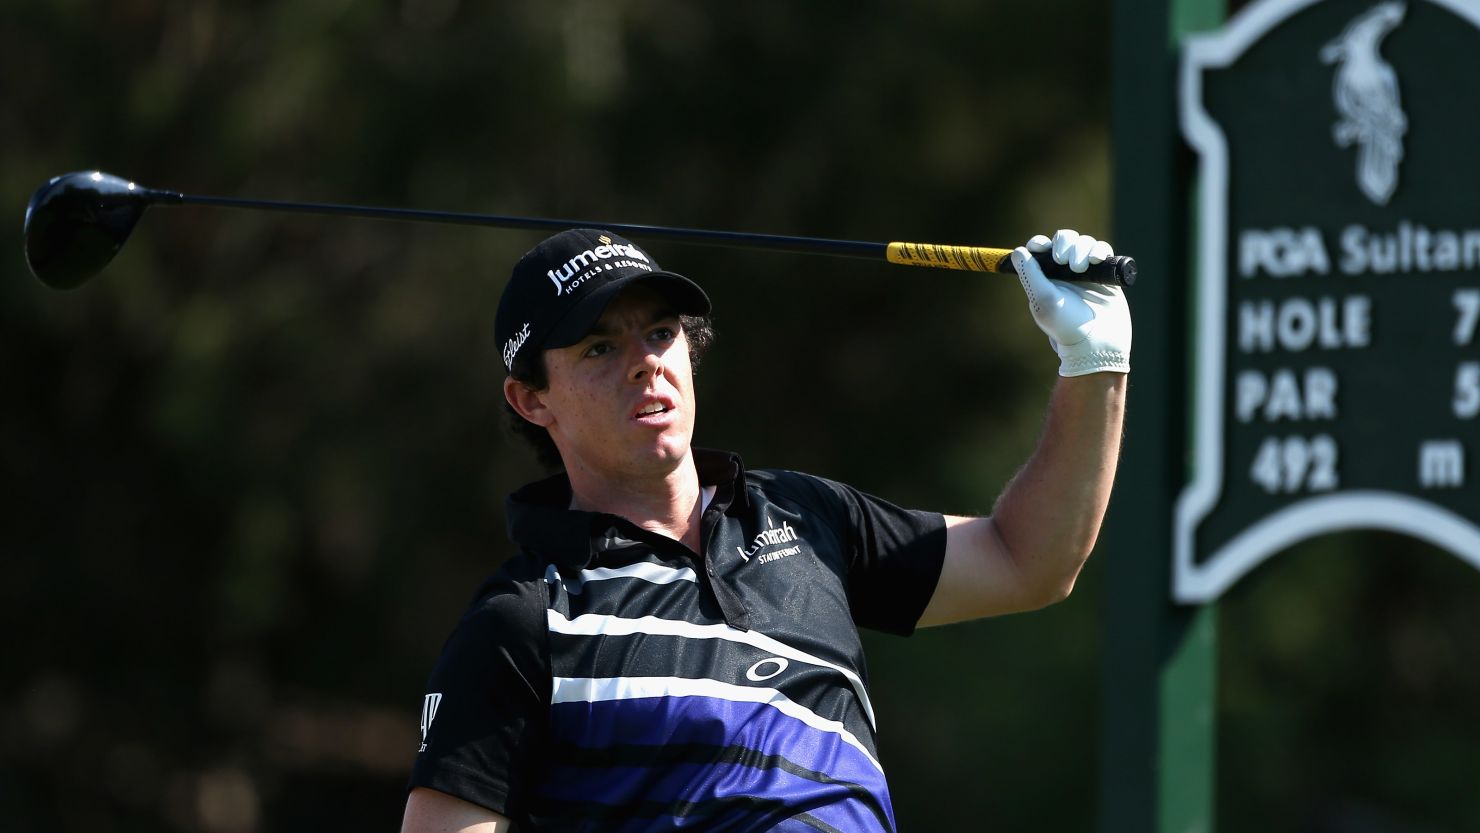 Rory McIlroy sank to defeat during his opening match at the World Golf Finals in Turkey